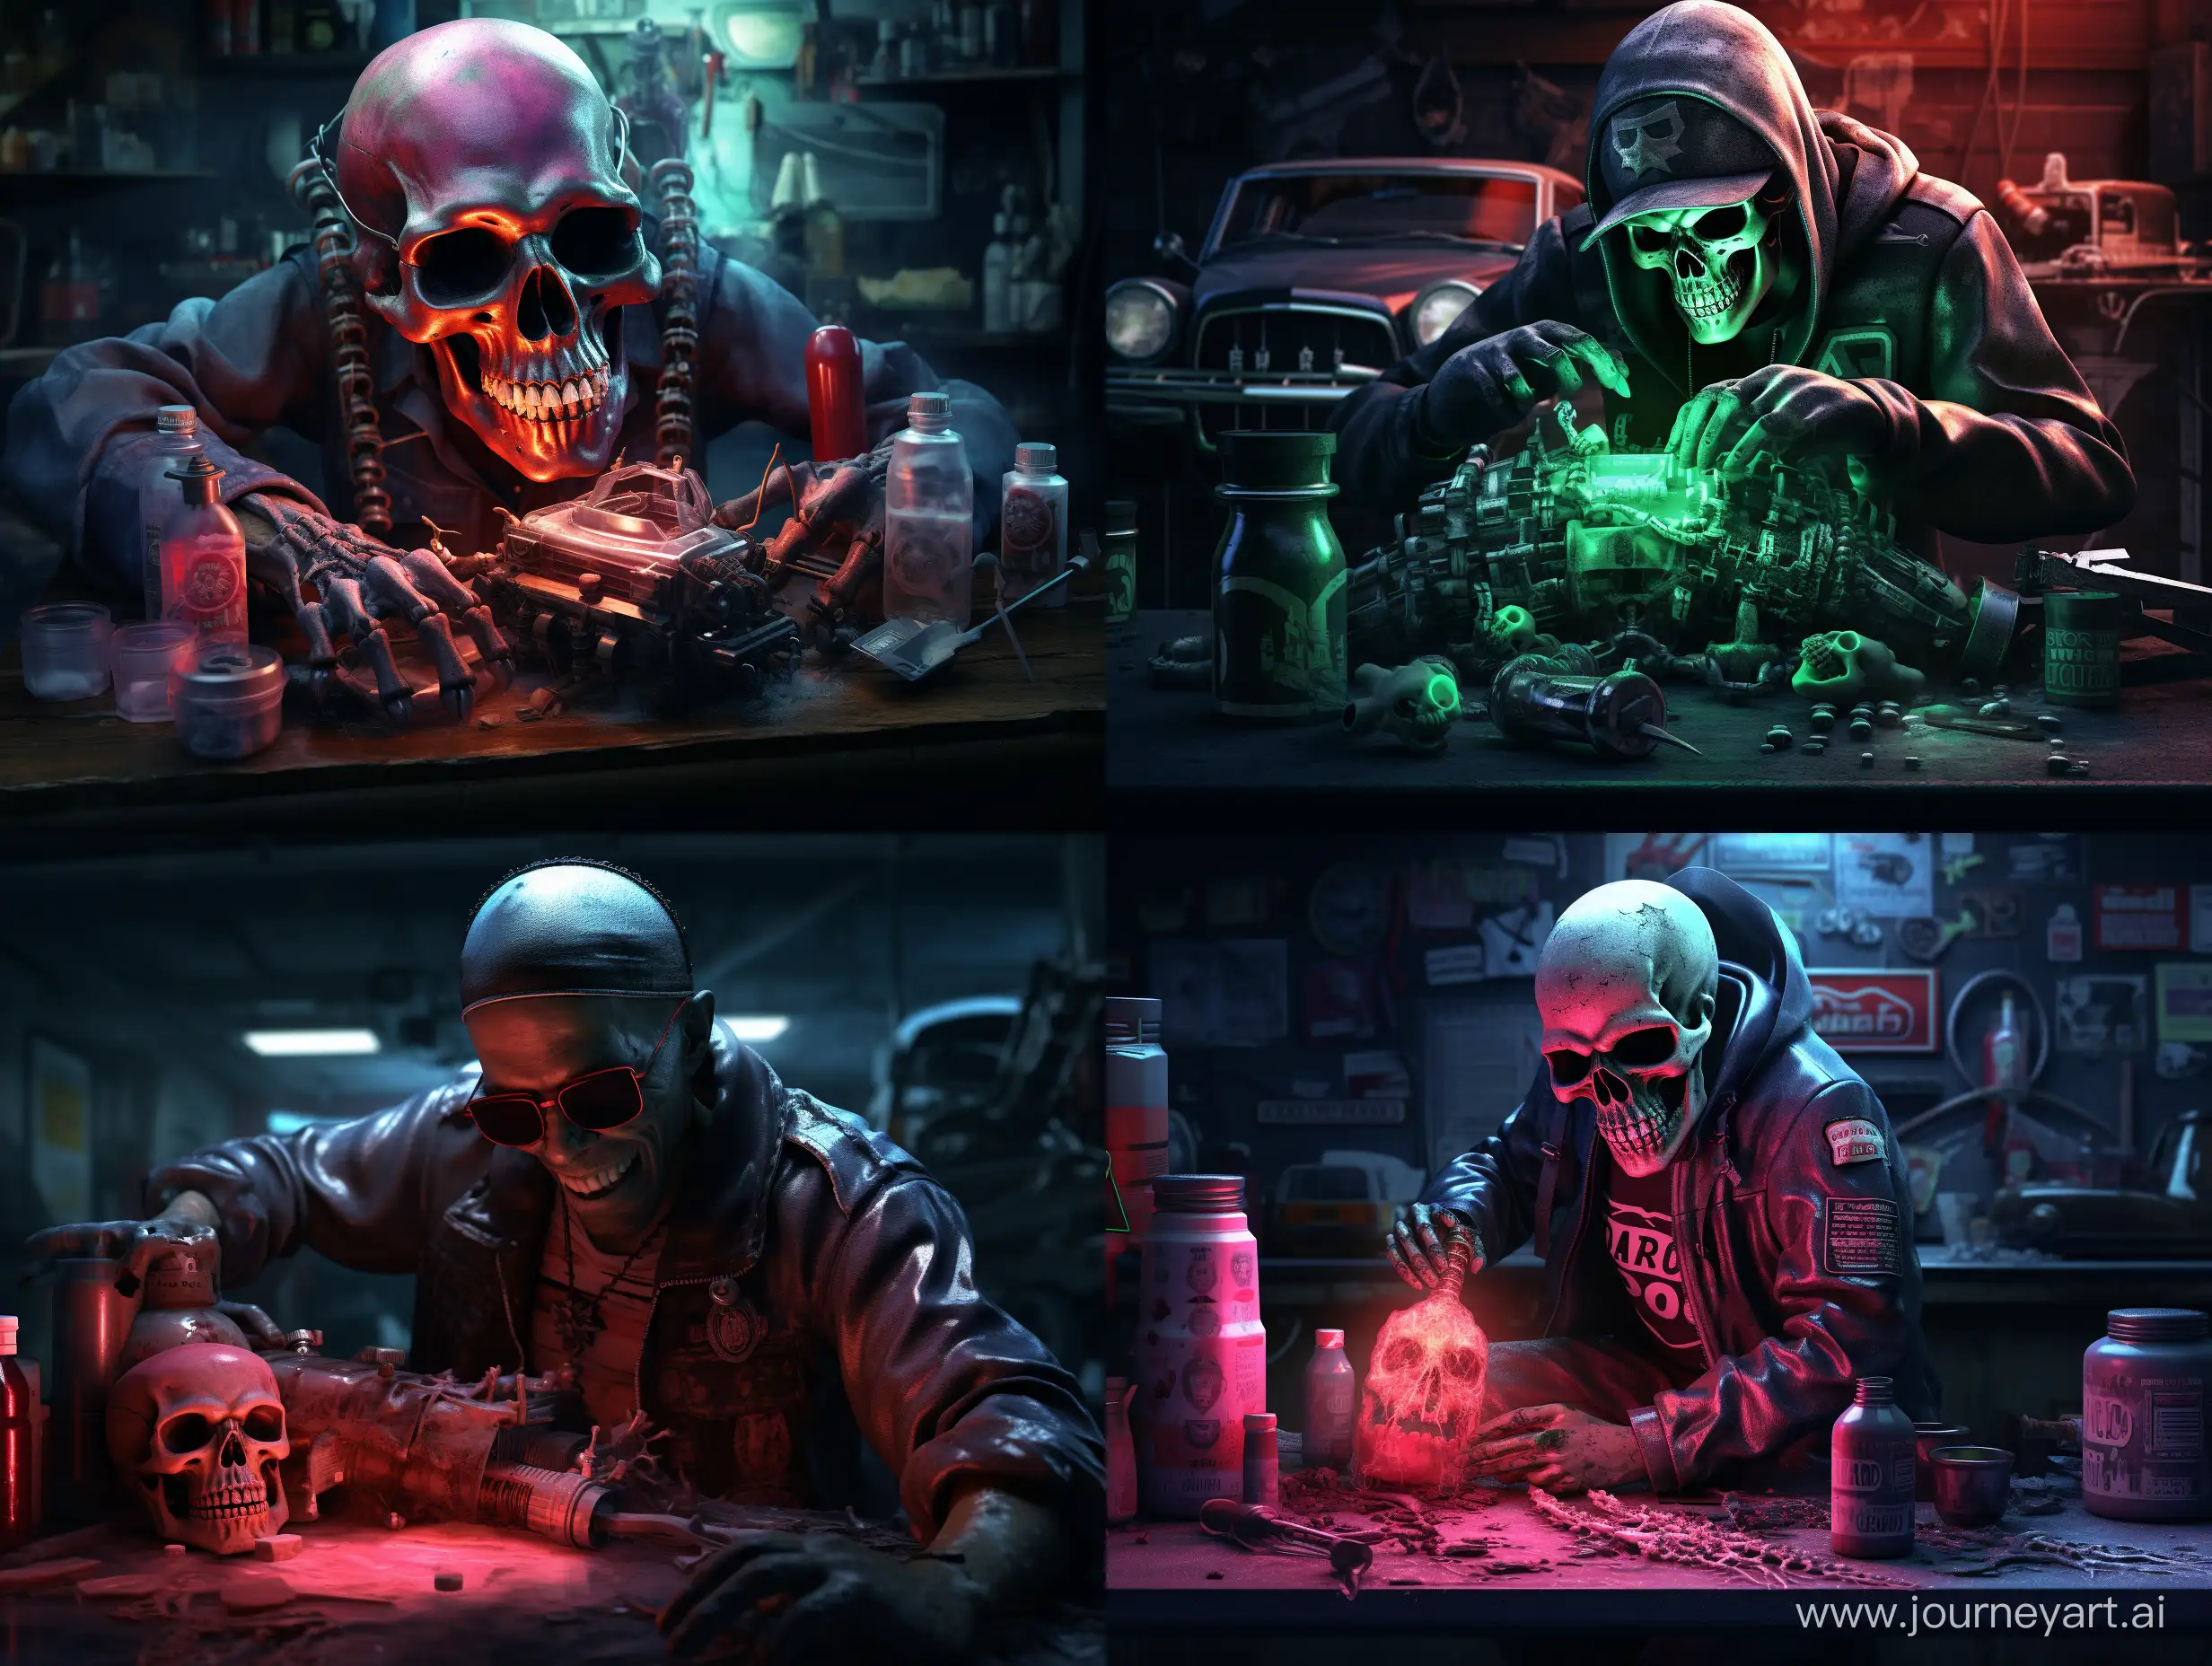 Ultra realistic, a mechanic is pouring poison into a car engine with an evil smile. on the poison bottle there is a skull logo and poison writing. the background of a car workshop. there is refraction of sunlight.